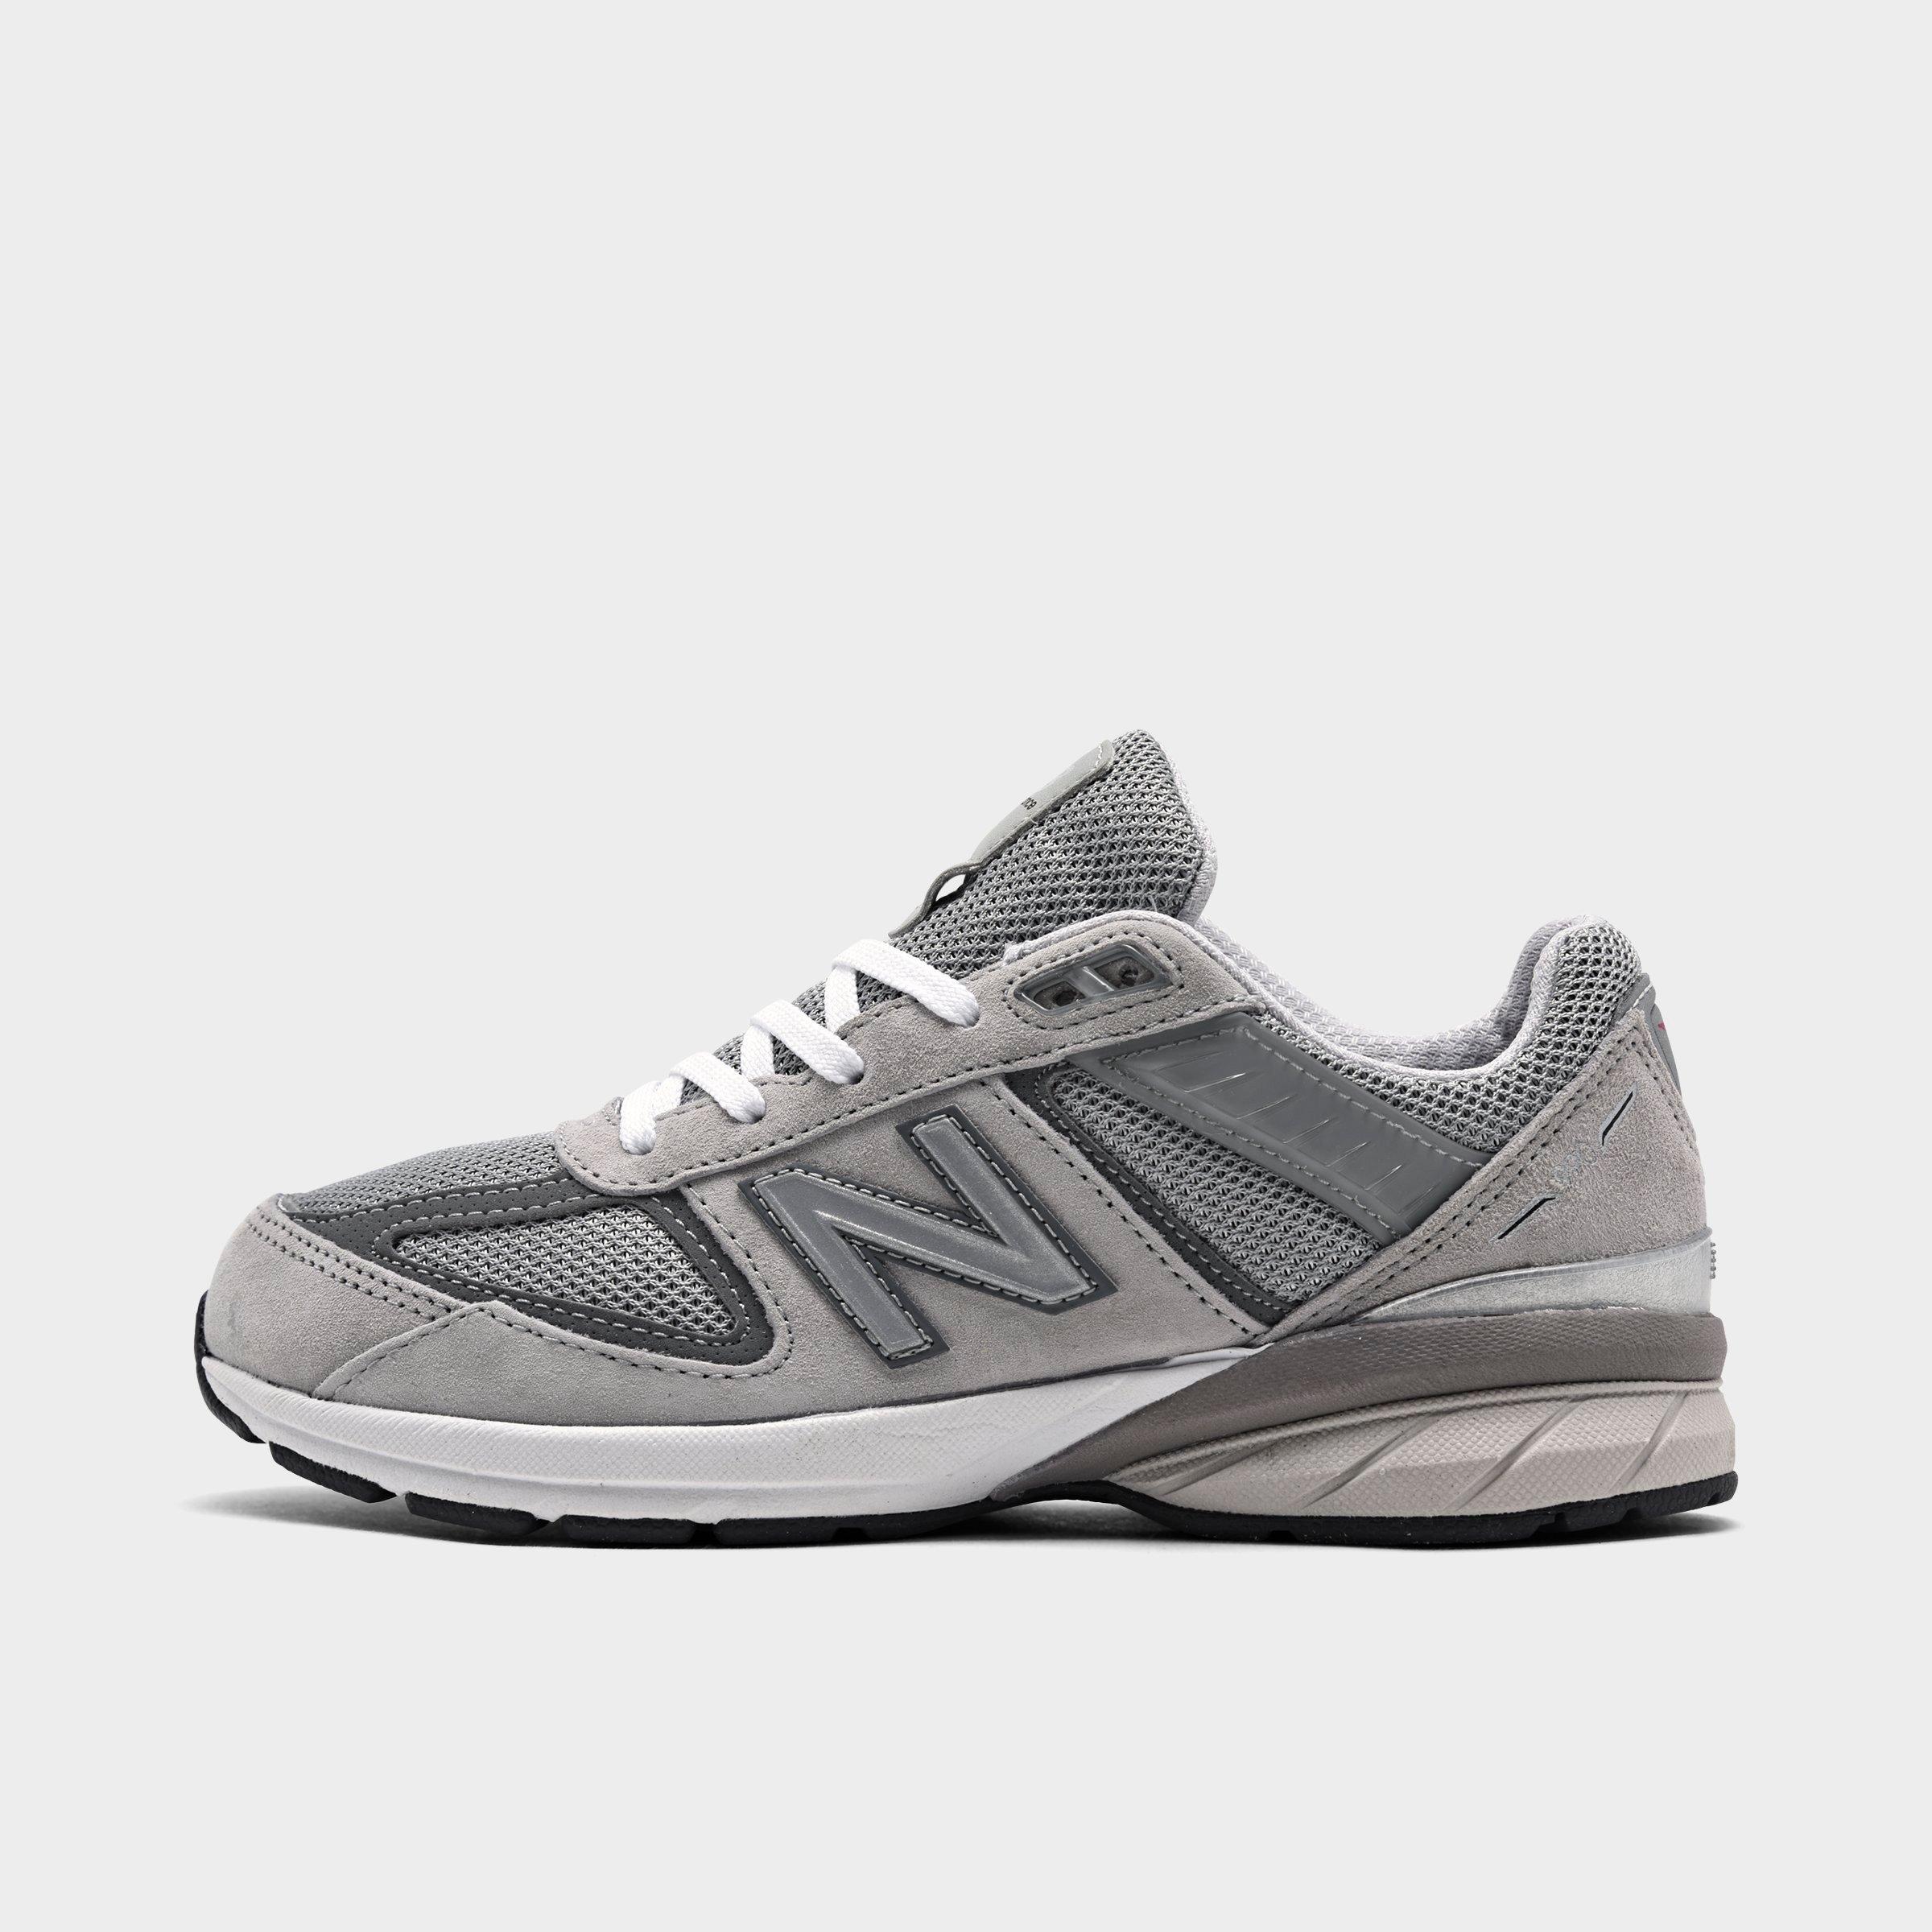 New Balance 990v5 Casual Shoes| JD Sports